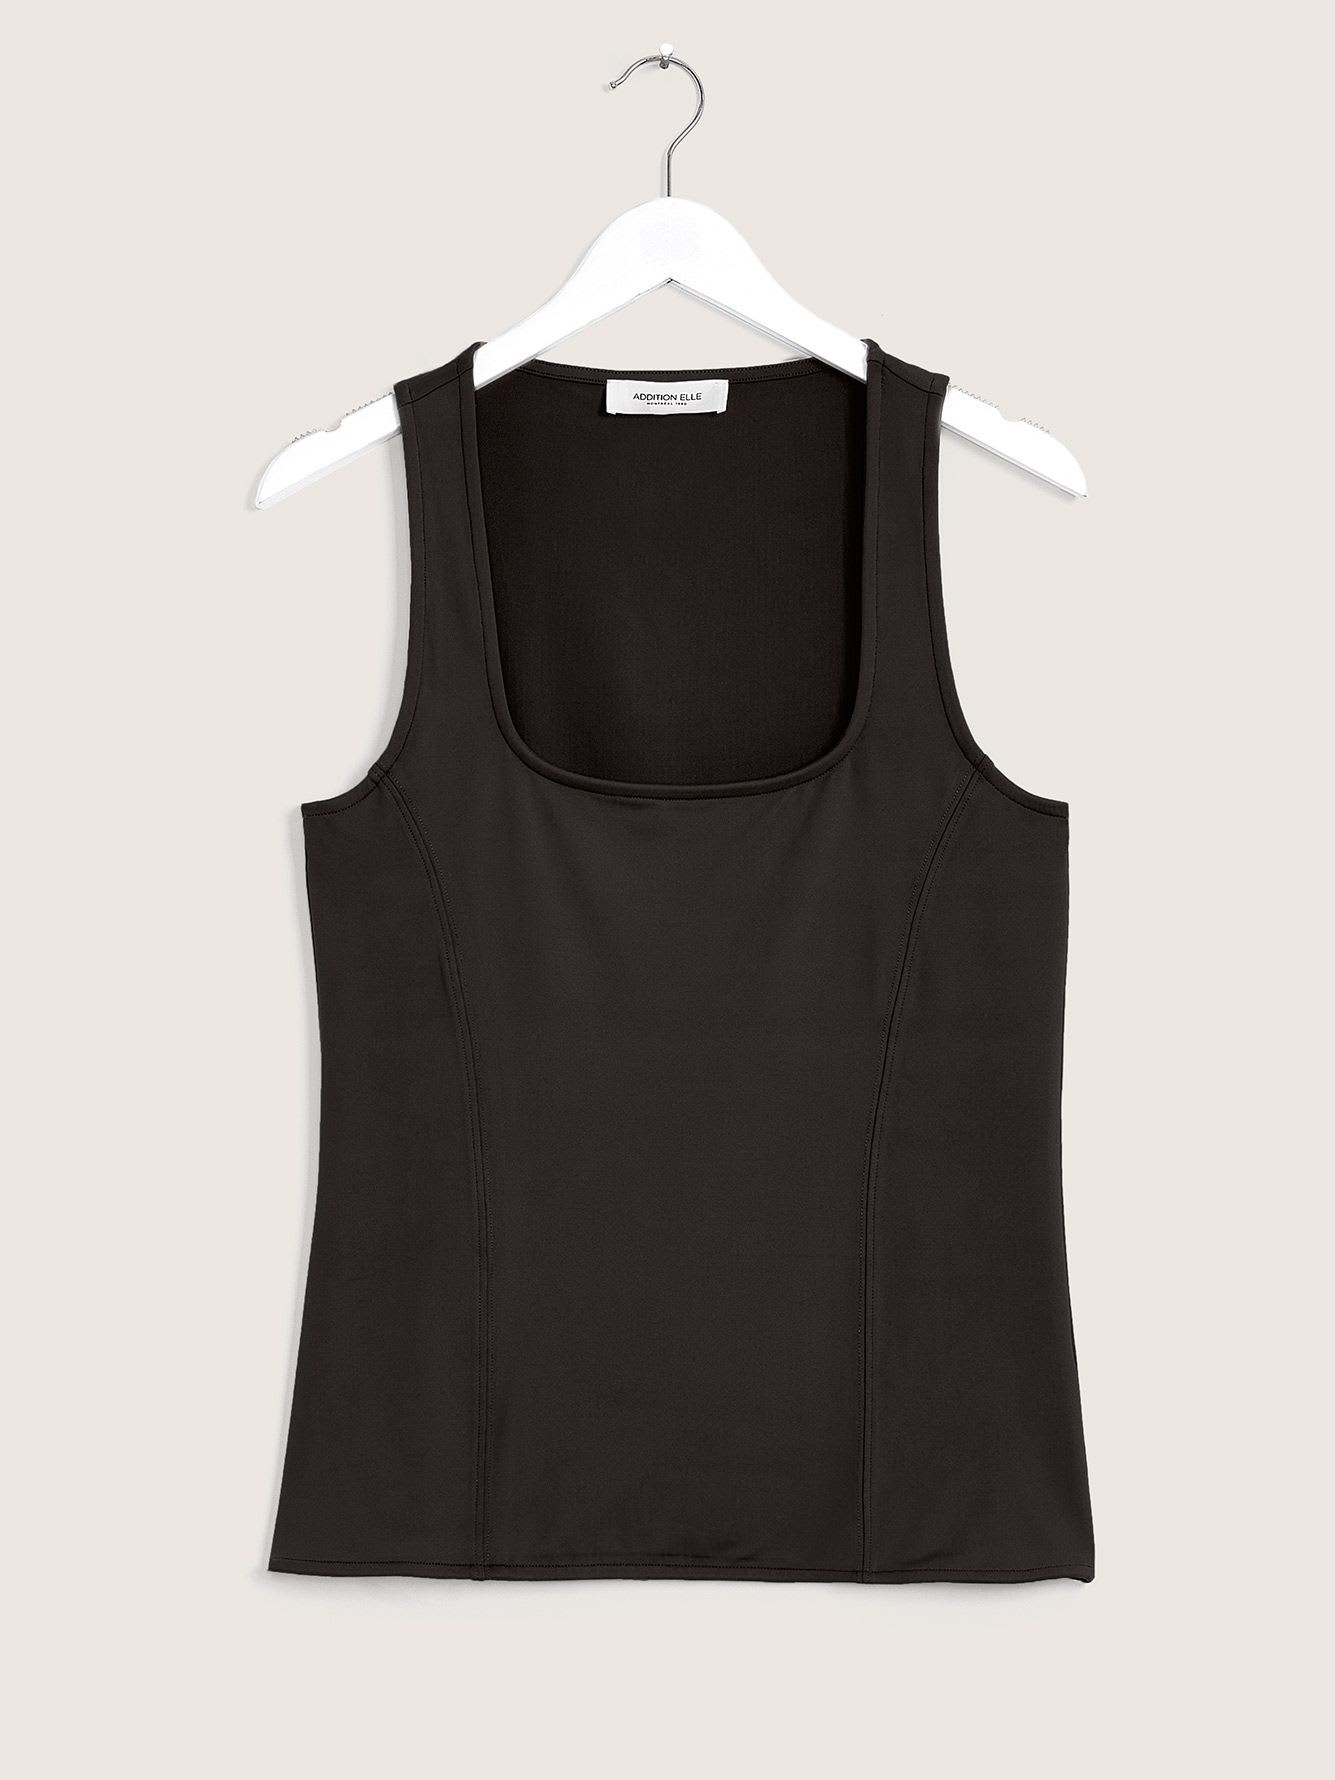 Responsible, Sleeveless Knit Top - Addition Elle